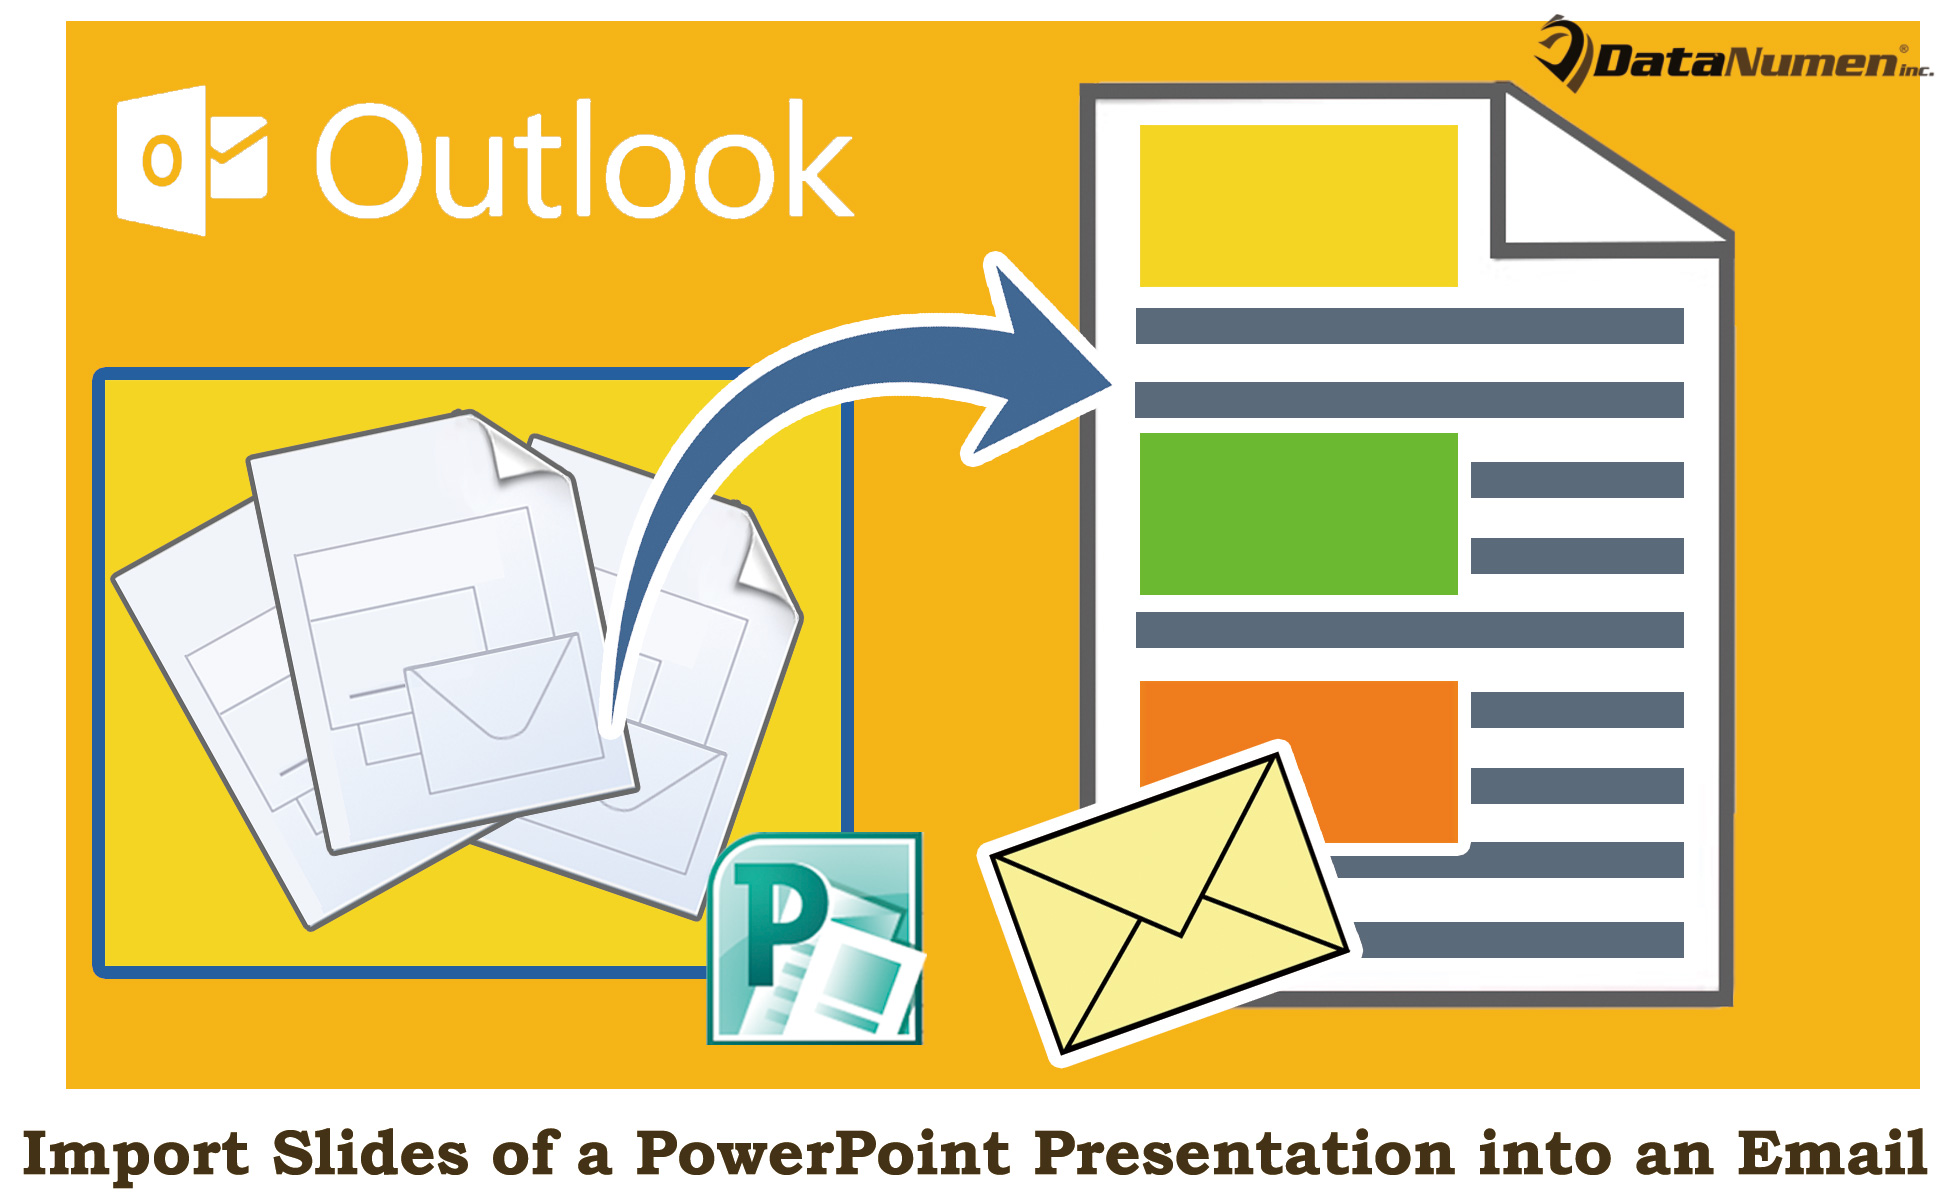 Quickly Import the Slides of a PowerPoint Presentation into Your Outlook Email